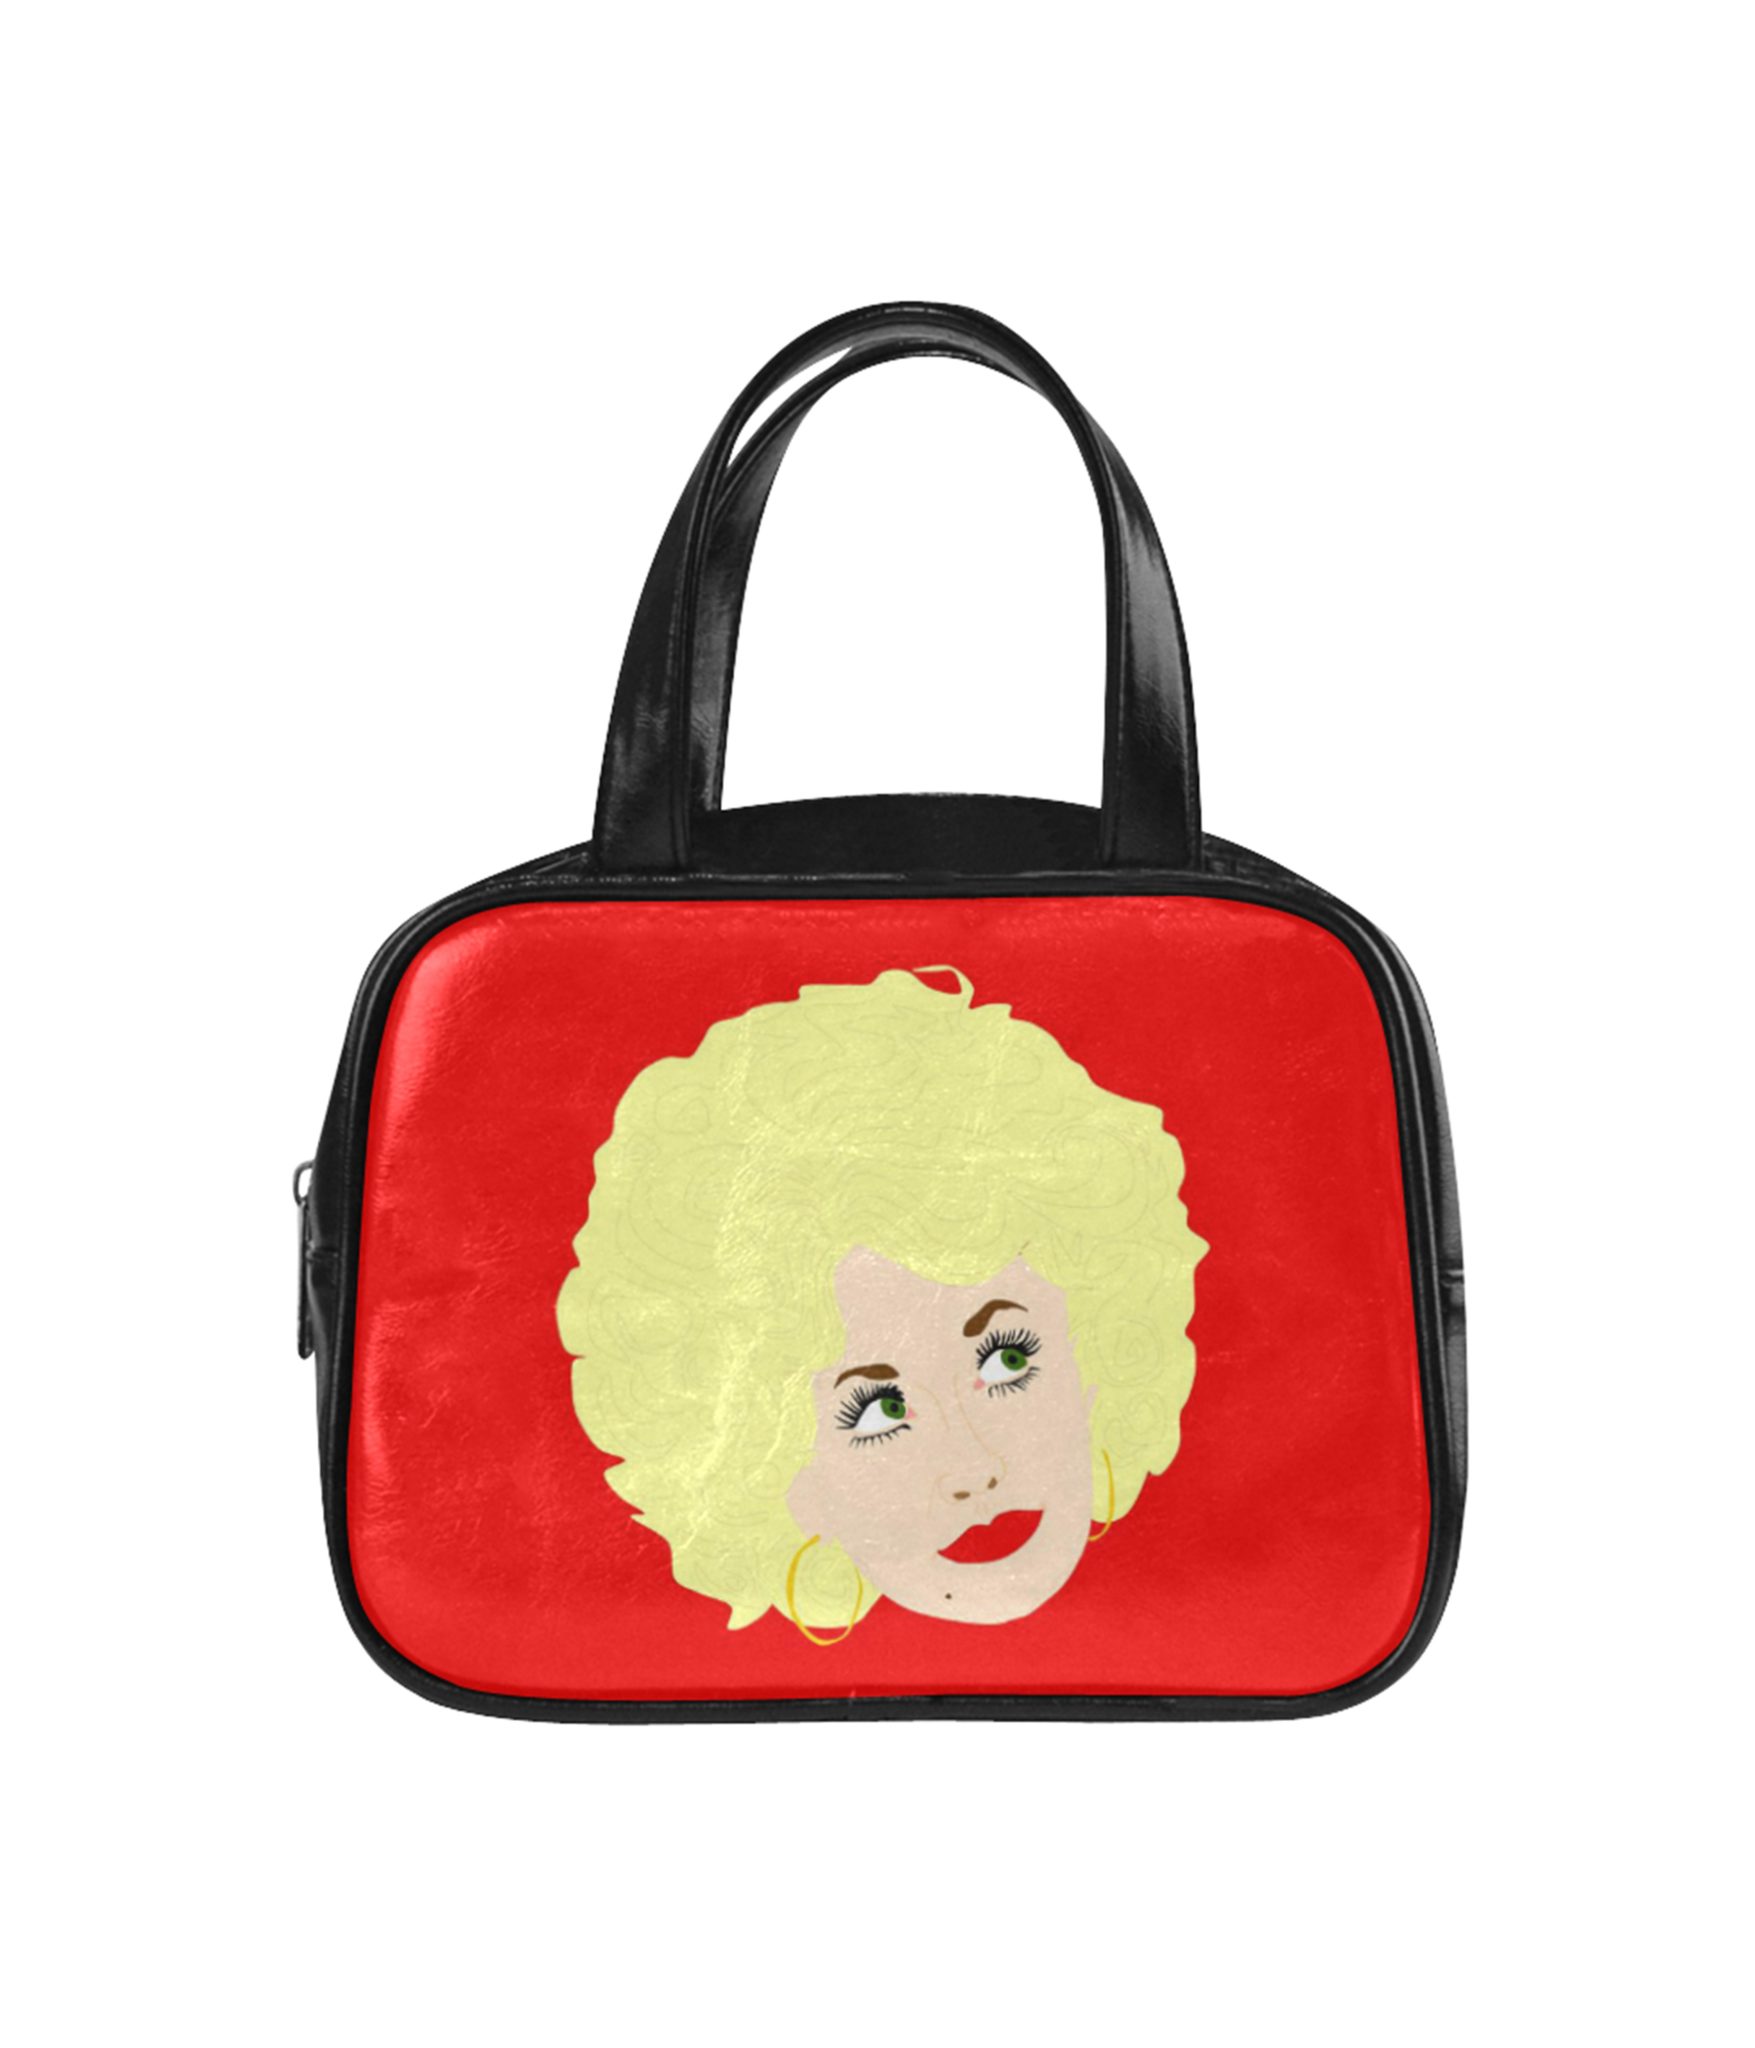 Dolly Bags - the Betty Bag